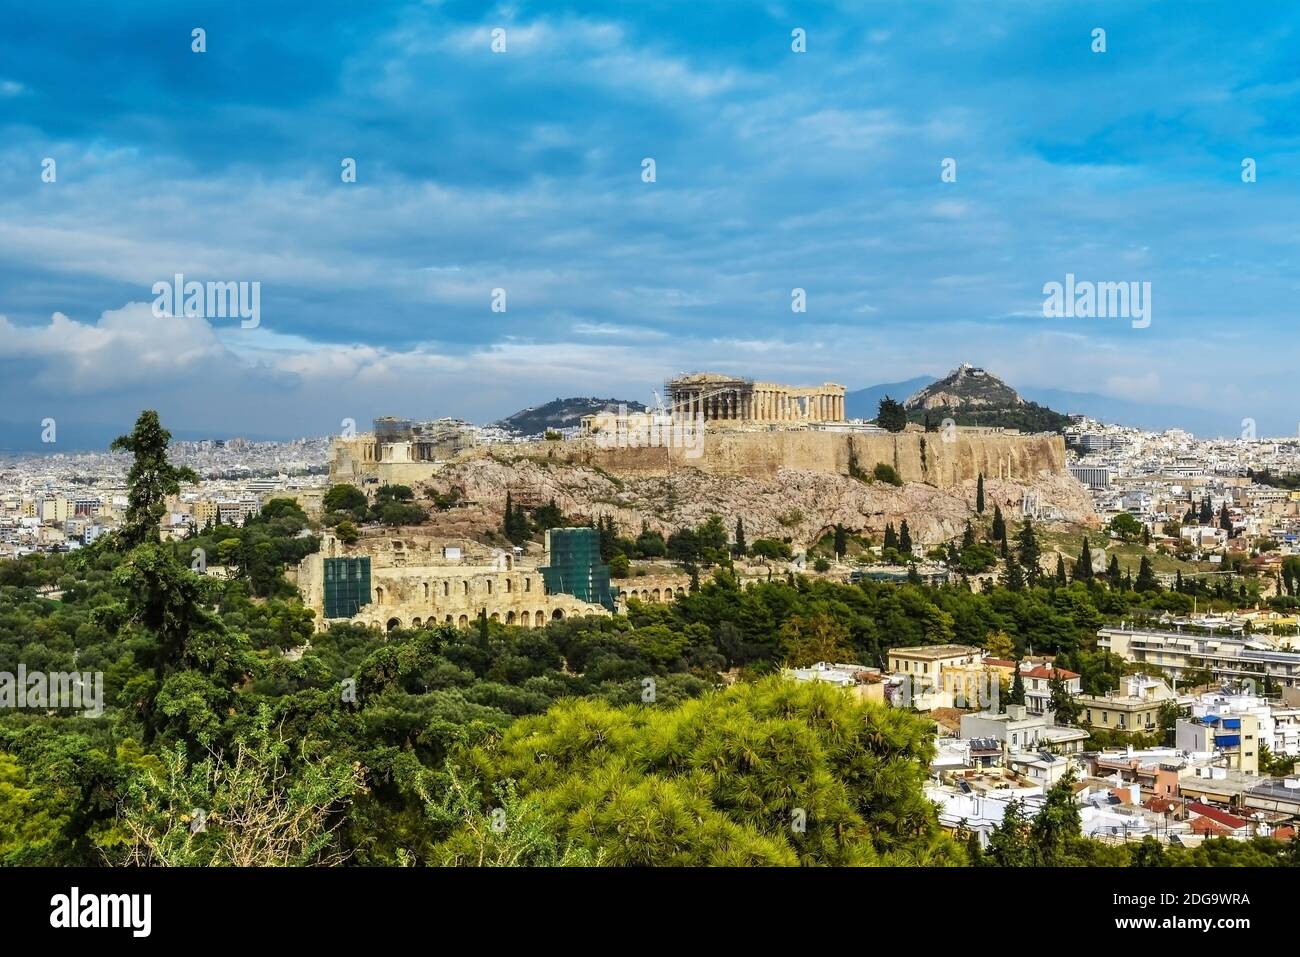 View of an acropolis, amphitheater and the mountain Lycabettus in Athens Stock Photo